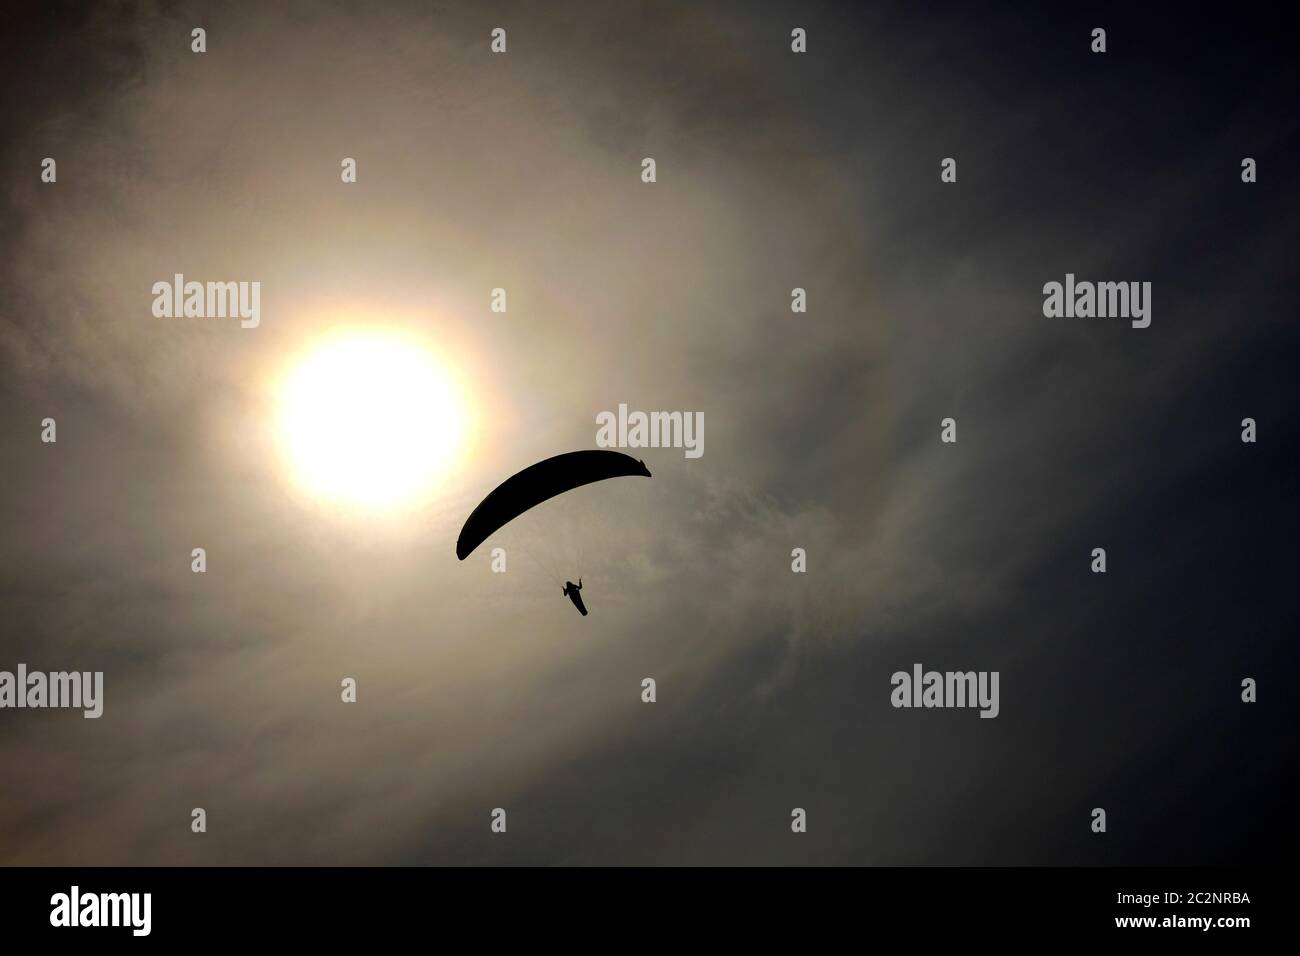 Paraglider soaring on wind thermals off Compton Isle of Wight in silhouette bright sun behind in grey cloudy sky Stock Photo